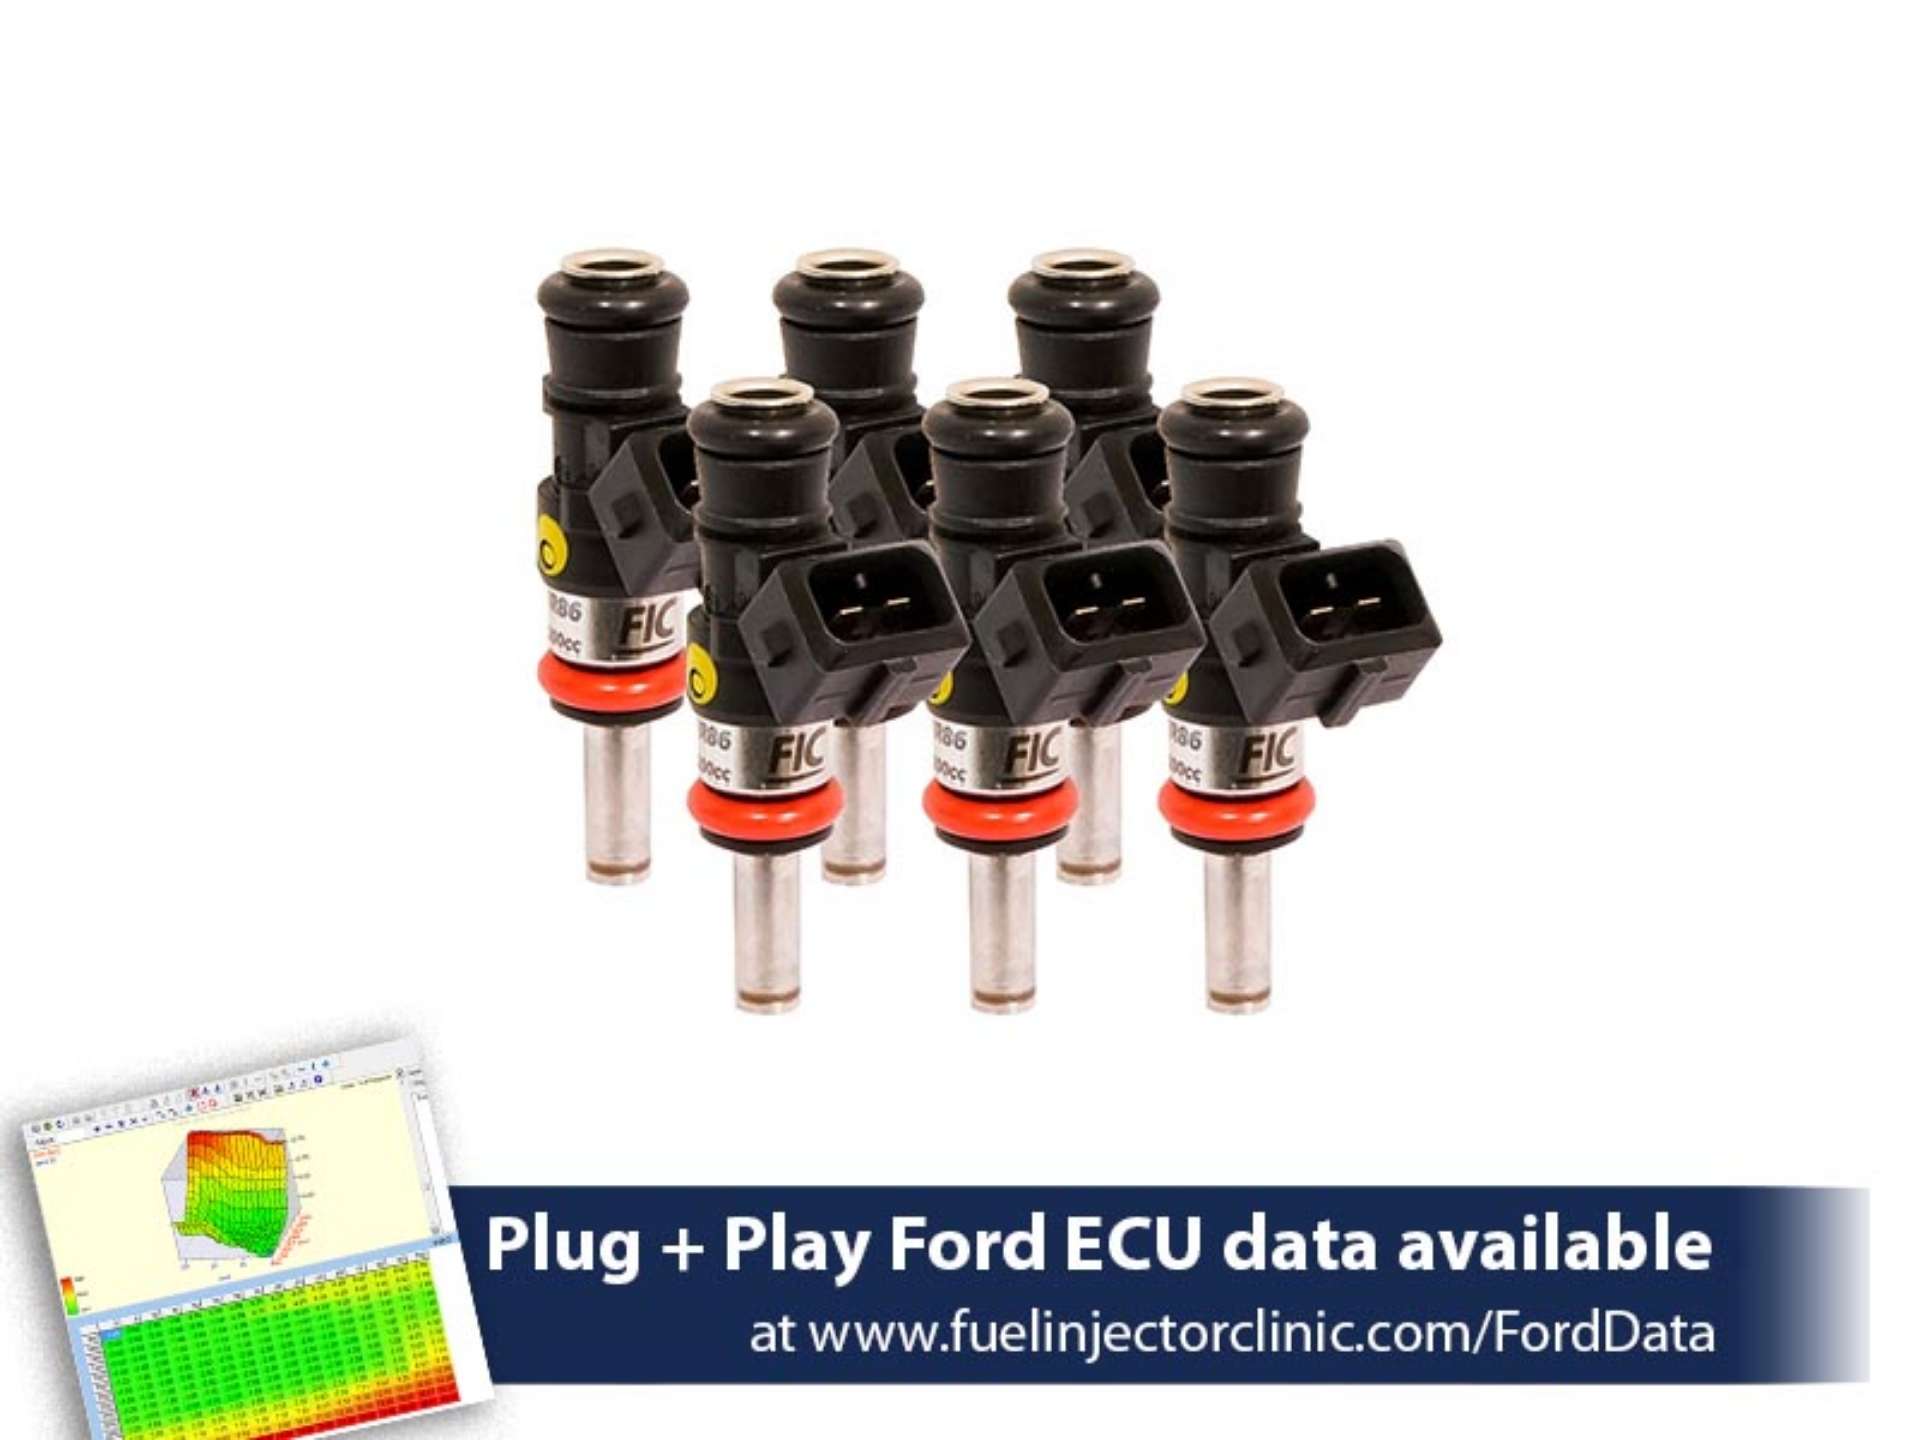 Picture of FIC1200cc (110 lbs/hr at 43.5 PSI fuel pressure) FIC Fuel  Injector Clinic Injector Set for Ford Raptor (2010-2014) Injector Sets